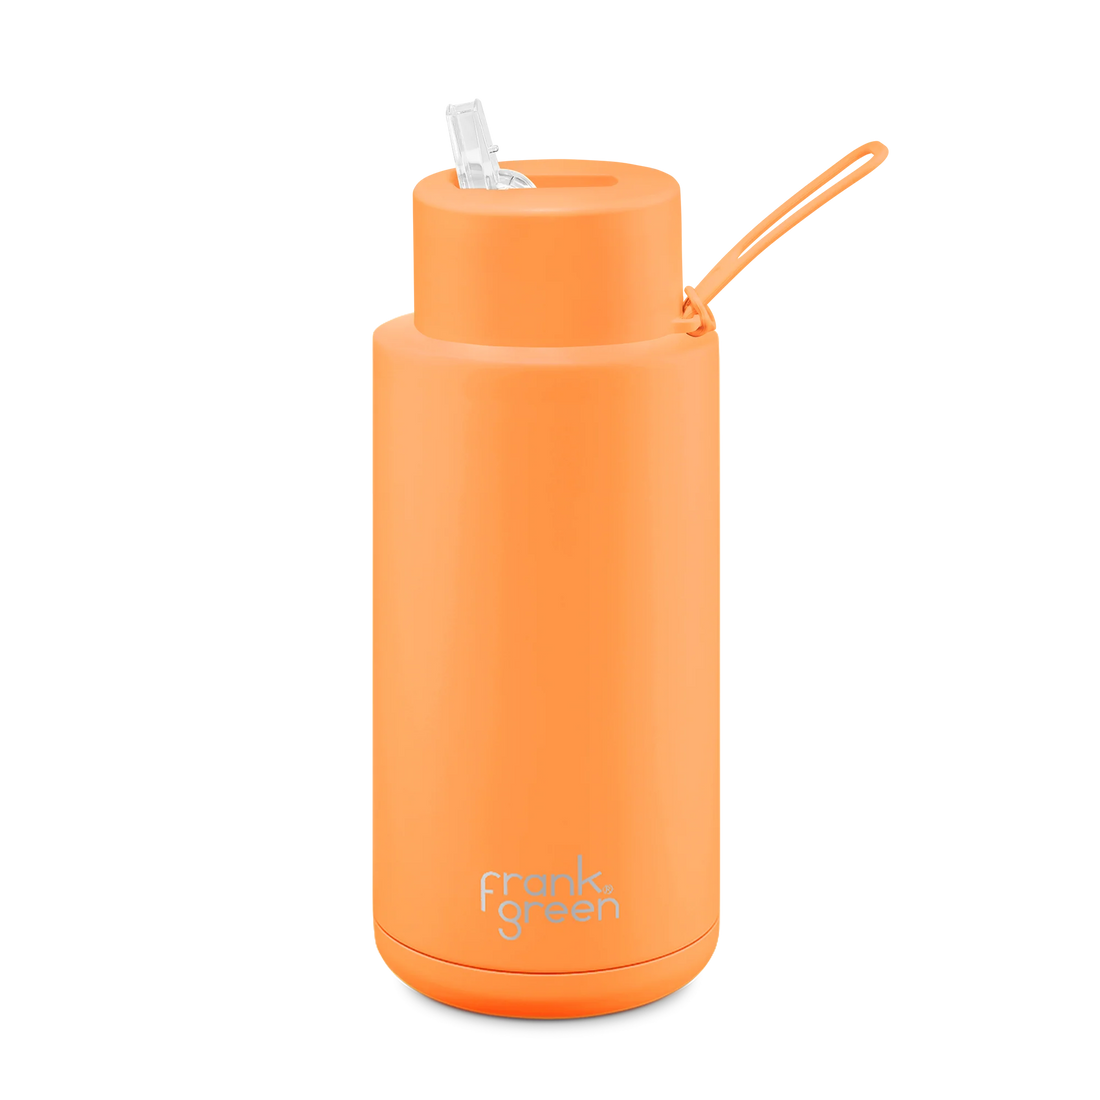 Frank Green Stainless Steel Ceramic Reusable Bottle Neon Orange With Straw And Strap 34oz/1 Ltr